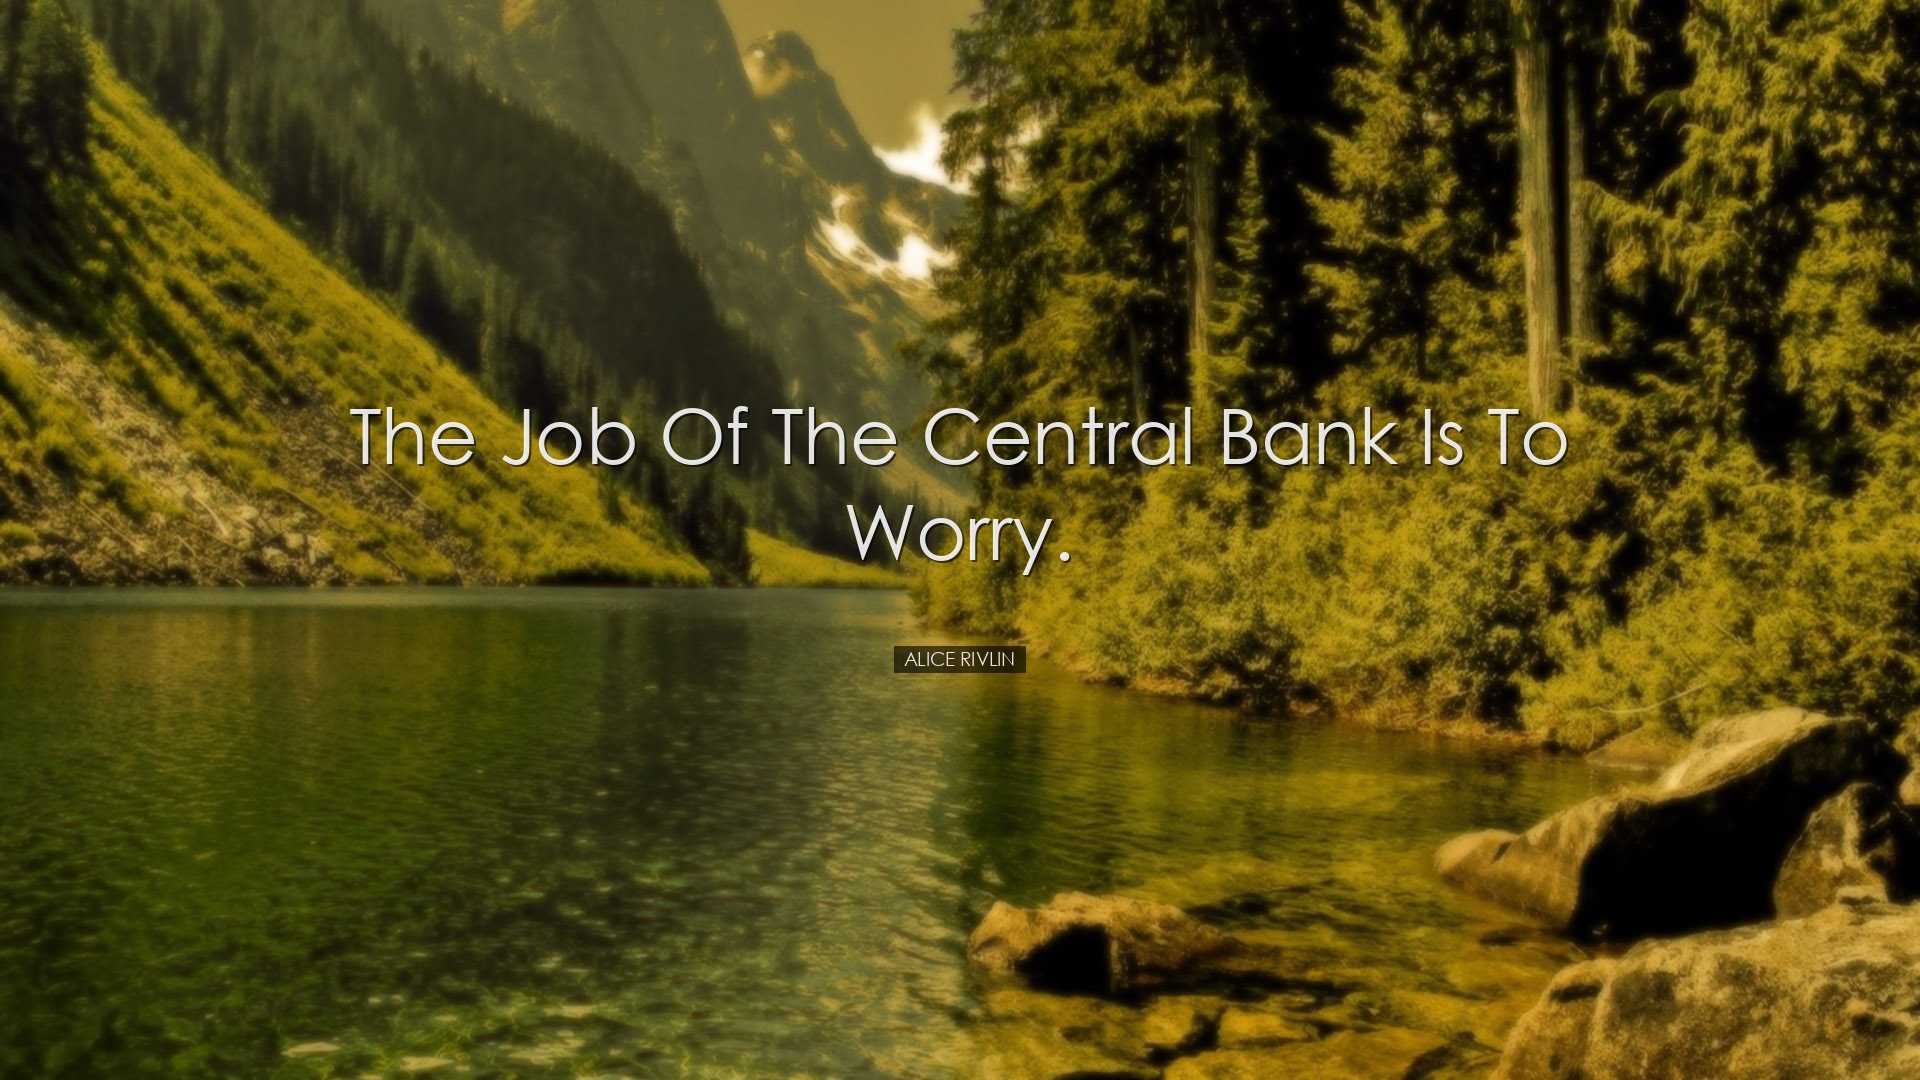 The job of the Central Bank is to worry. - Alice Rivlin